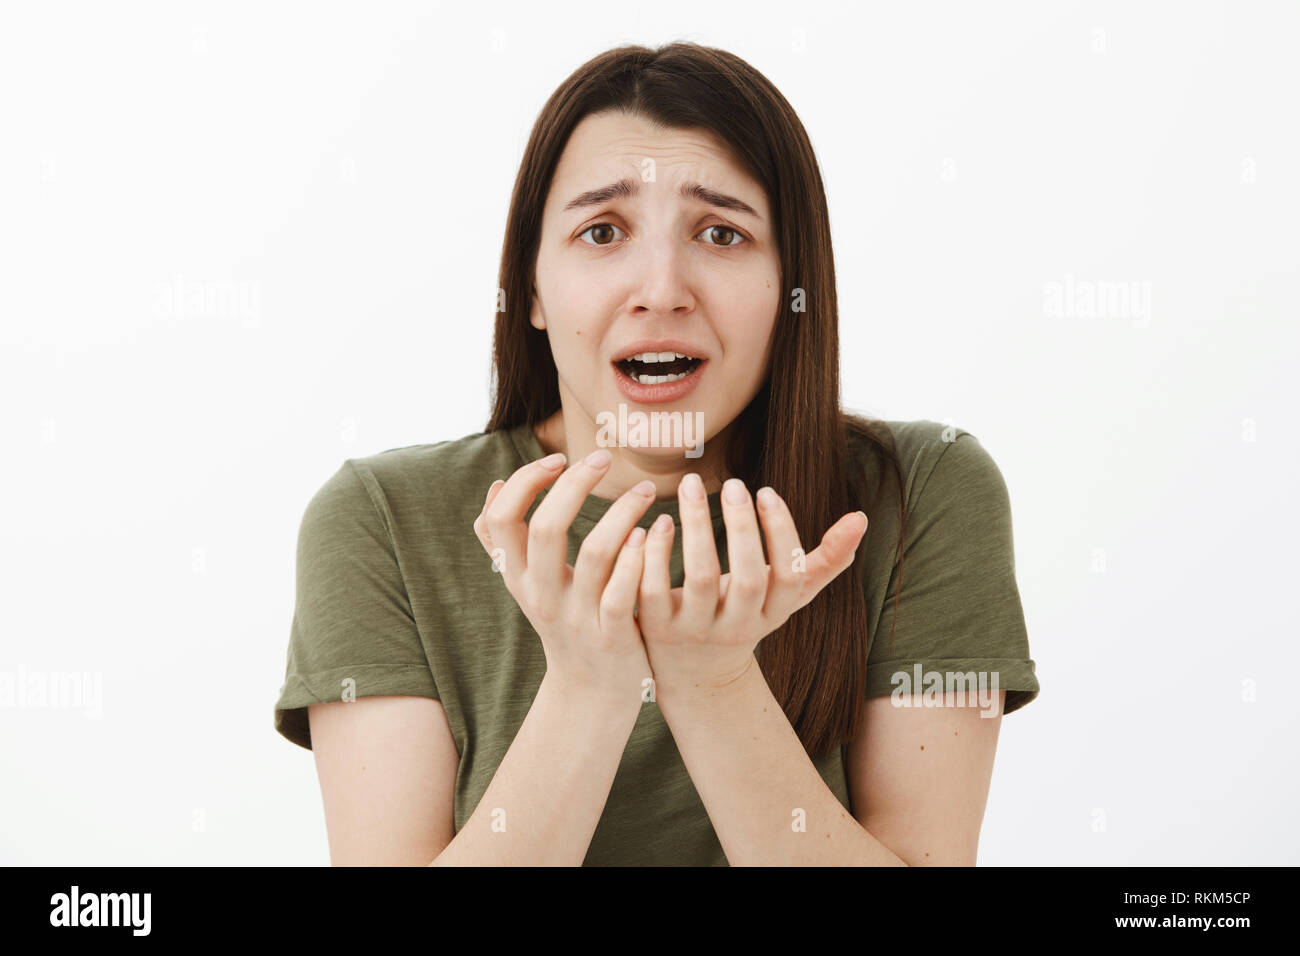 Woman in despair having problems standing freaked out in panic, distressed and upset losing everything holding shaking hands nead face frowning and Stock Photo